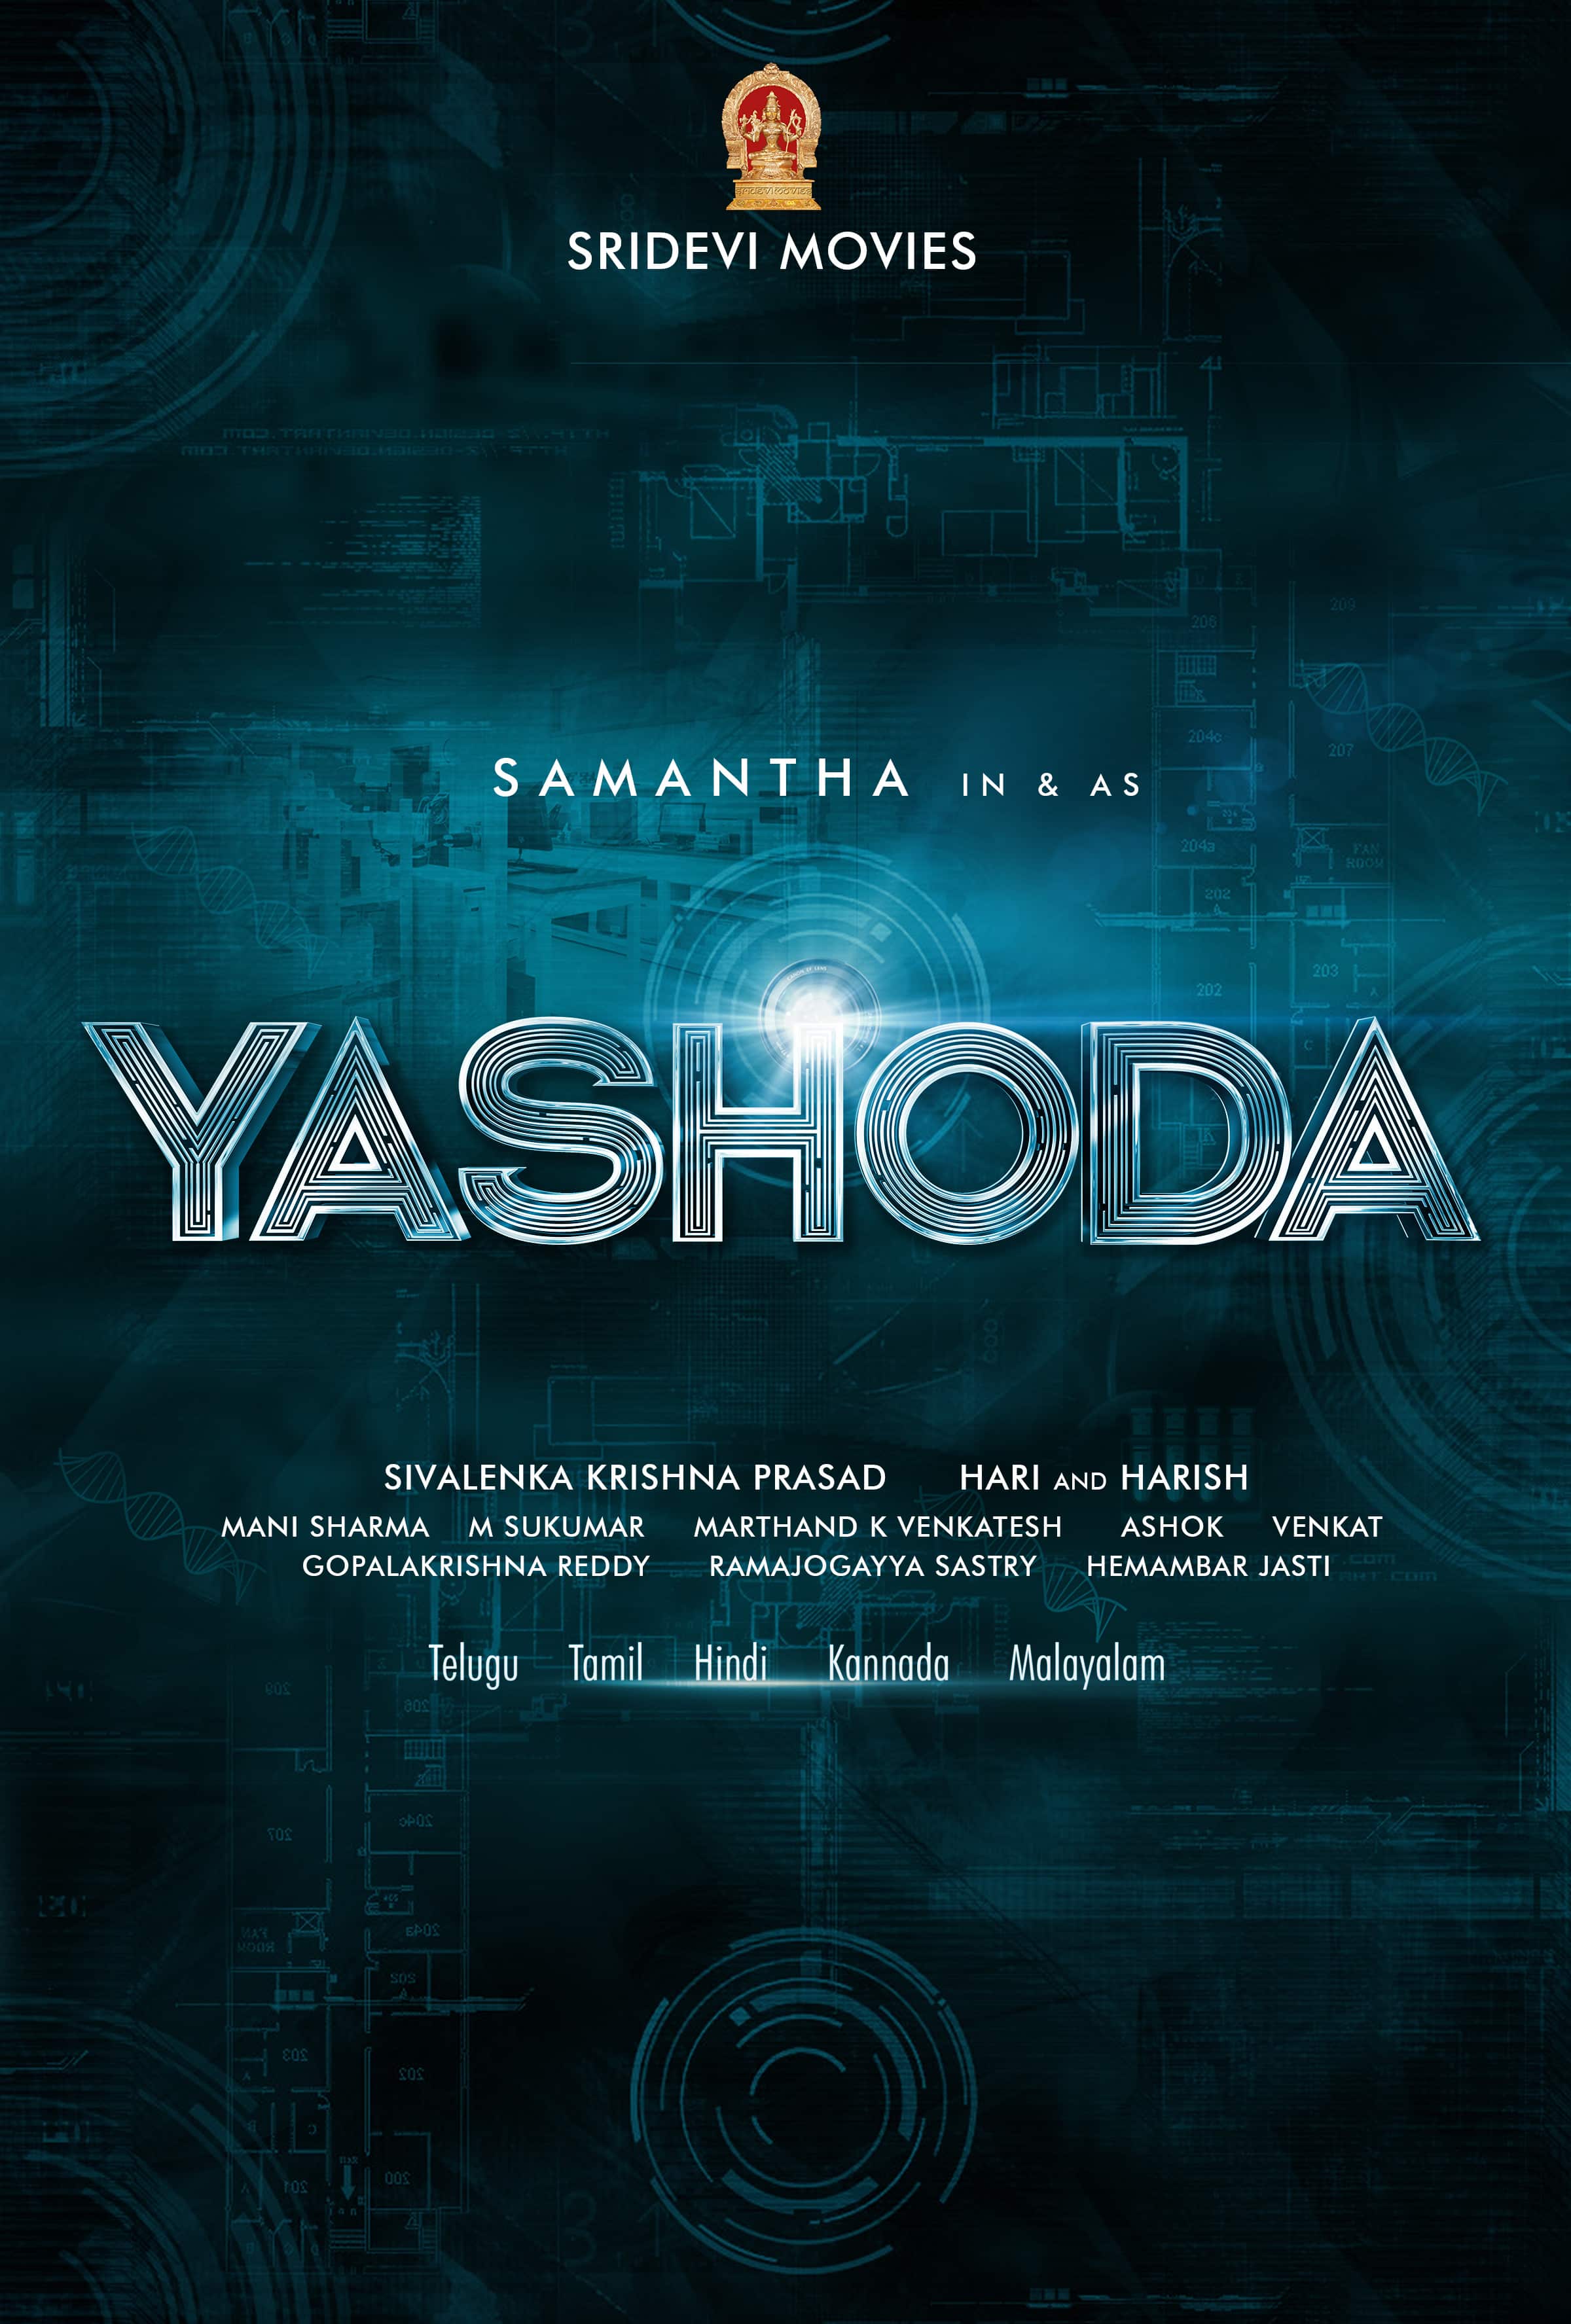 Watch #YASHODA in your language with 3D Spatial sound on “cinedubs”. Enjoy  audio in Telugu, Tamil, Kannada, Hindi or Malayalam in any… | Instagram